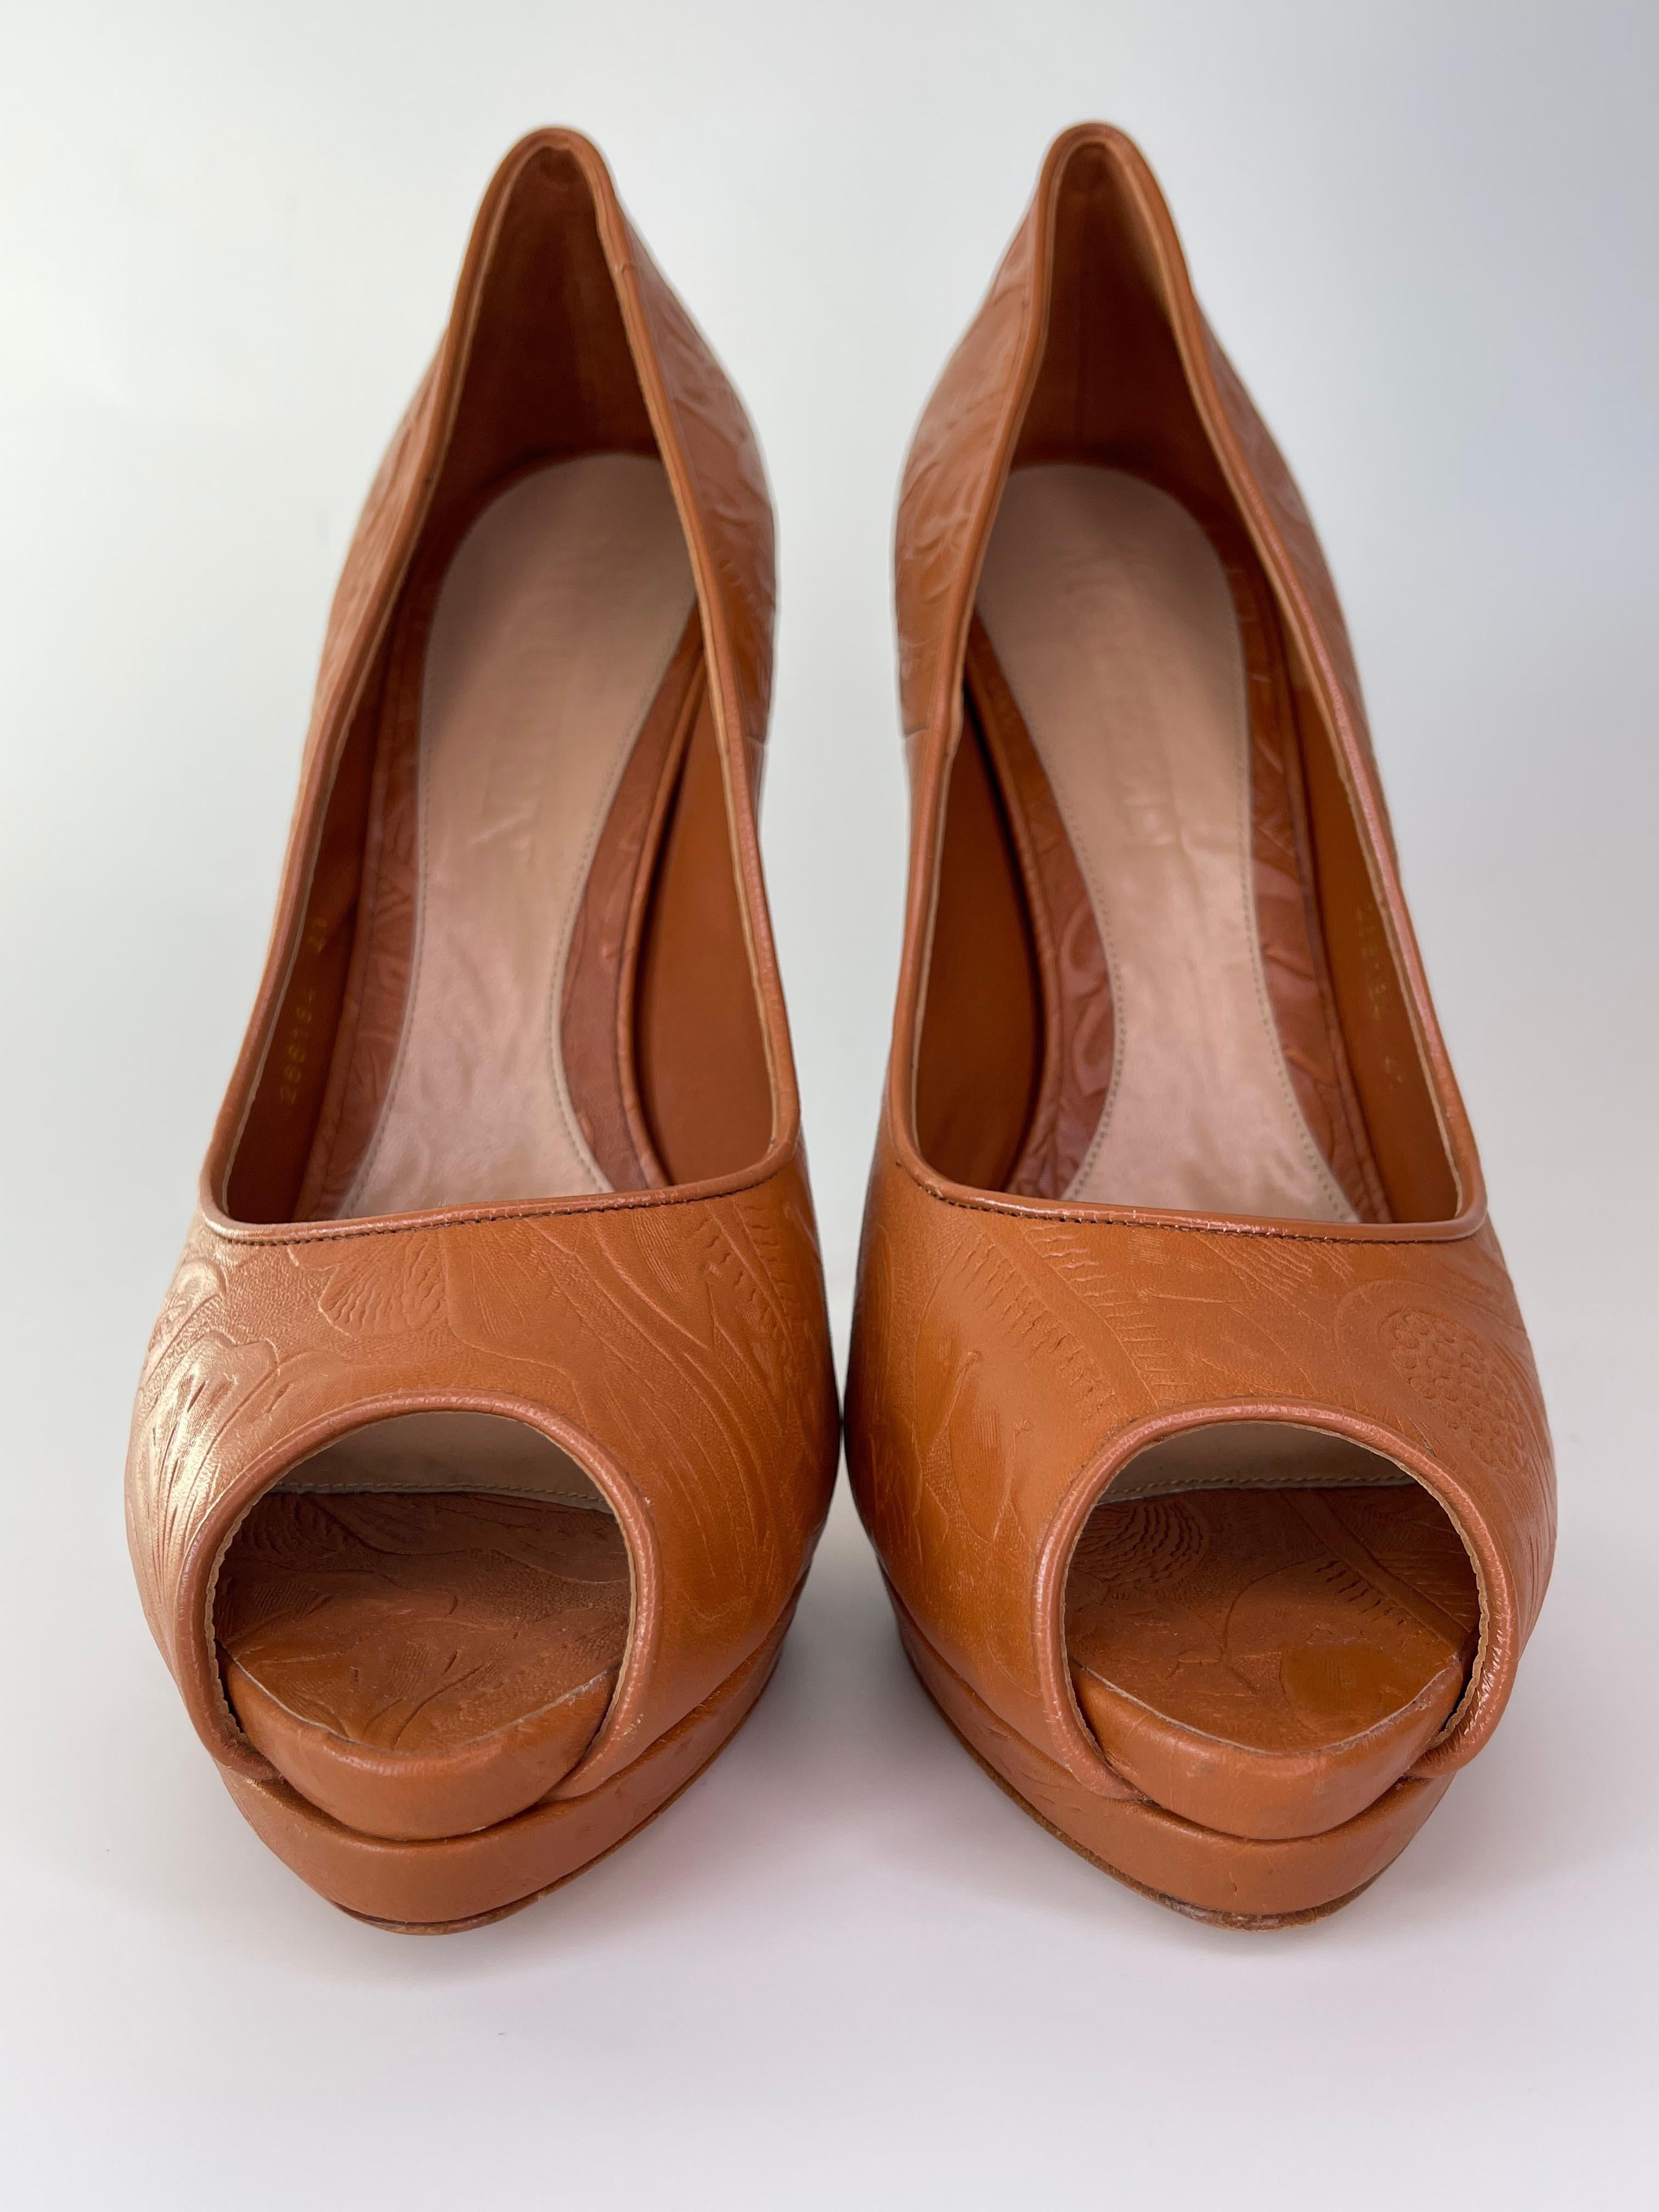 COLOR: Brandy (mixture of orange and brown)
MATERIAL: Leather with wood heel
ITEM CODE: 266184
SIZE: 41 EU / 10 US
HEEL HEIGHT: 147 mm (5.8 in)
COMES WITH: Original box
CONDITION: Excellent - strong heels with minimal signs of wear consistent with